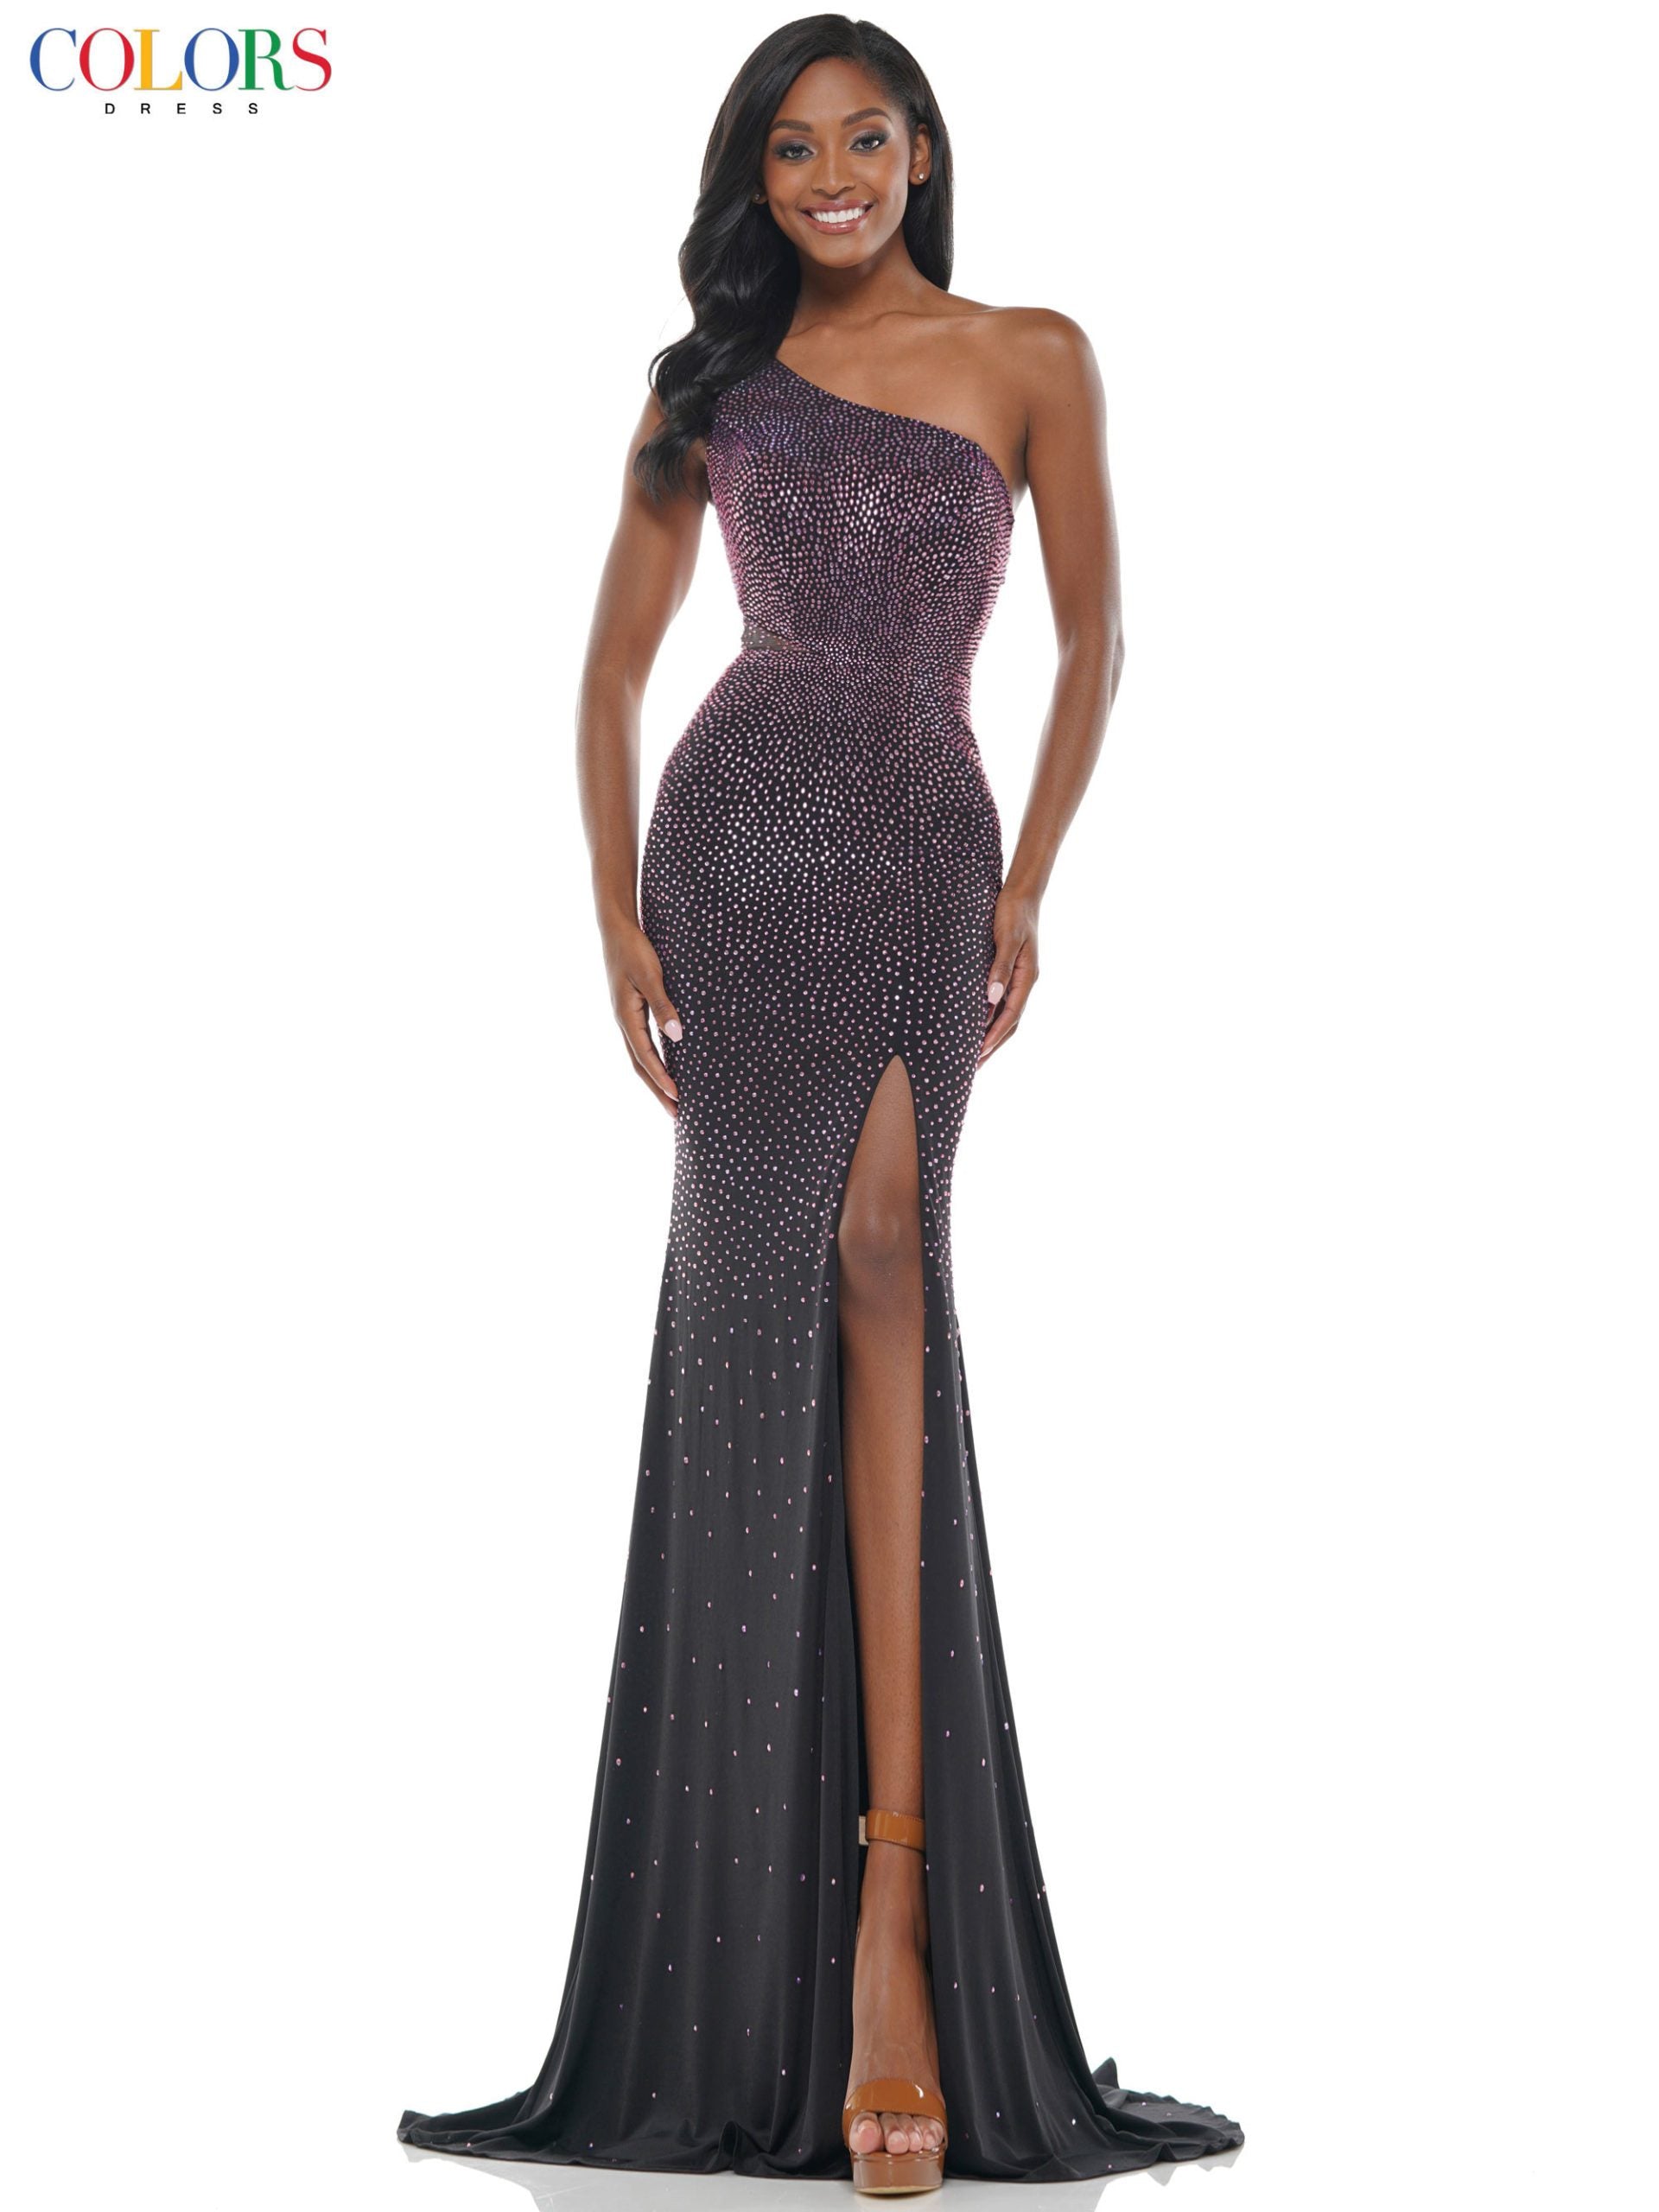 Shop Sheer Sexy Black Gown - AD Singh